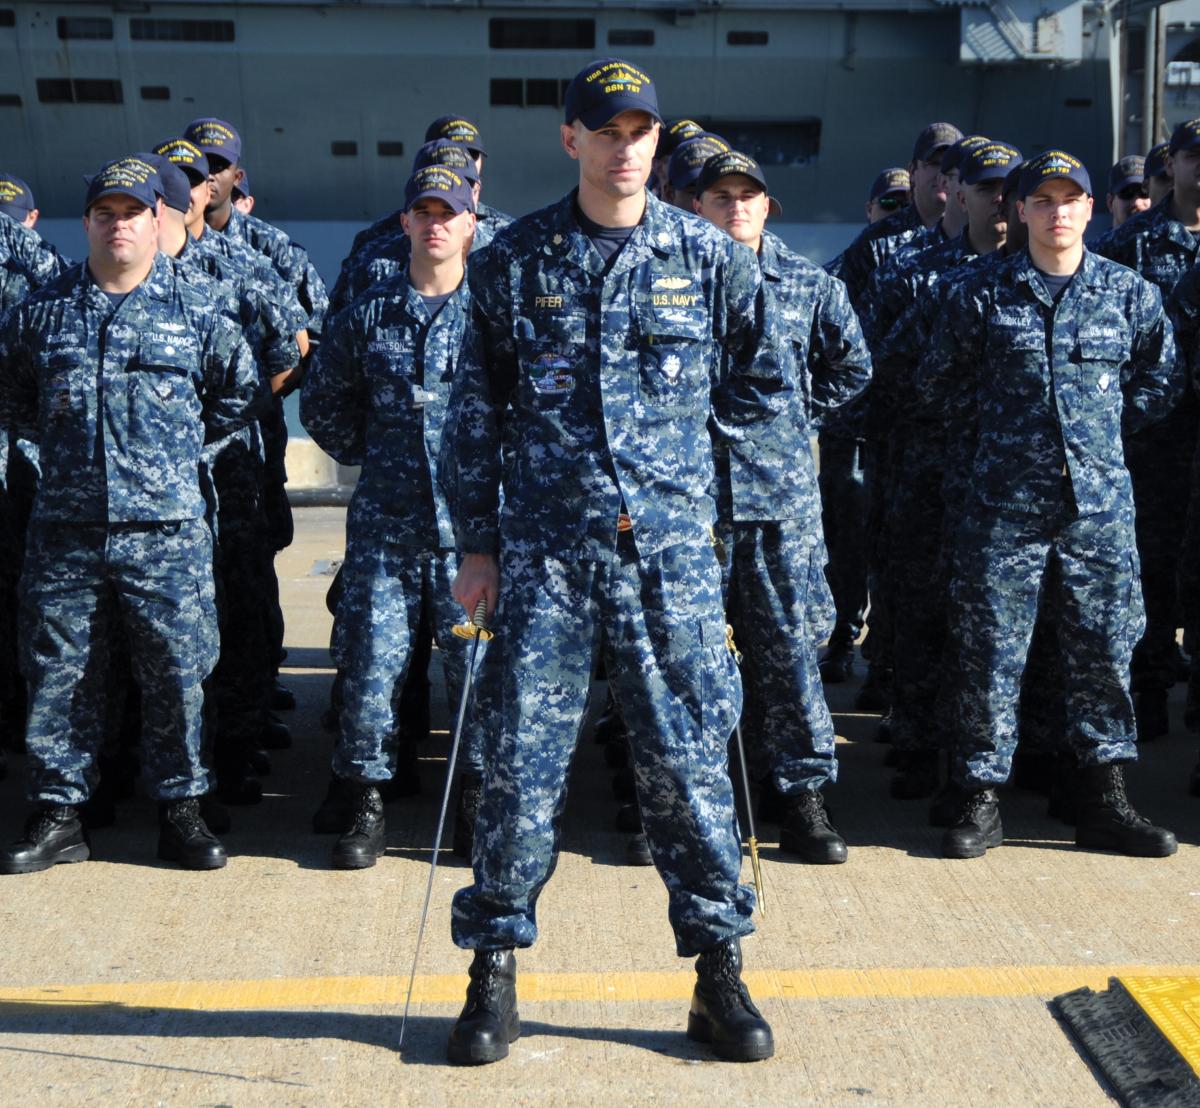 us navy fatigues blue